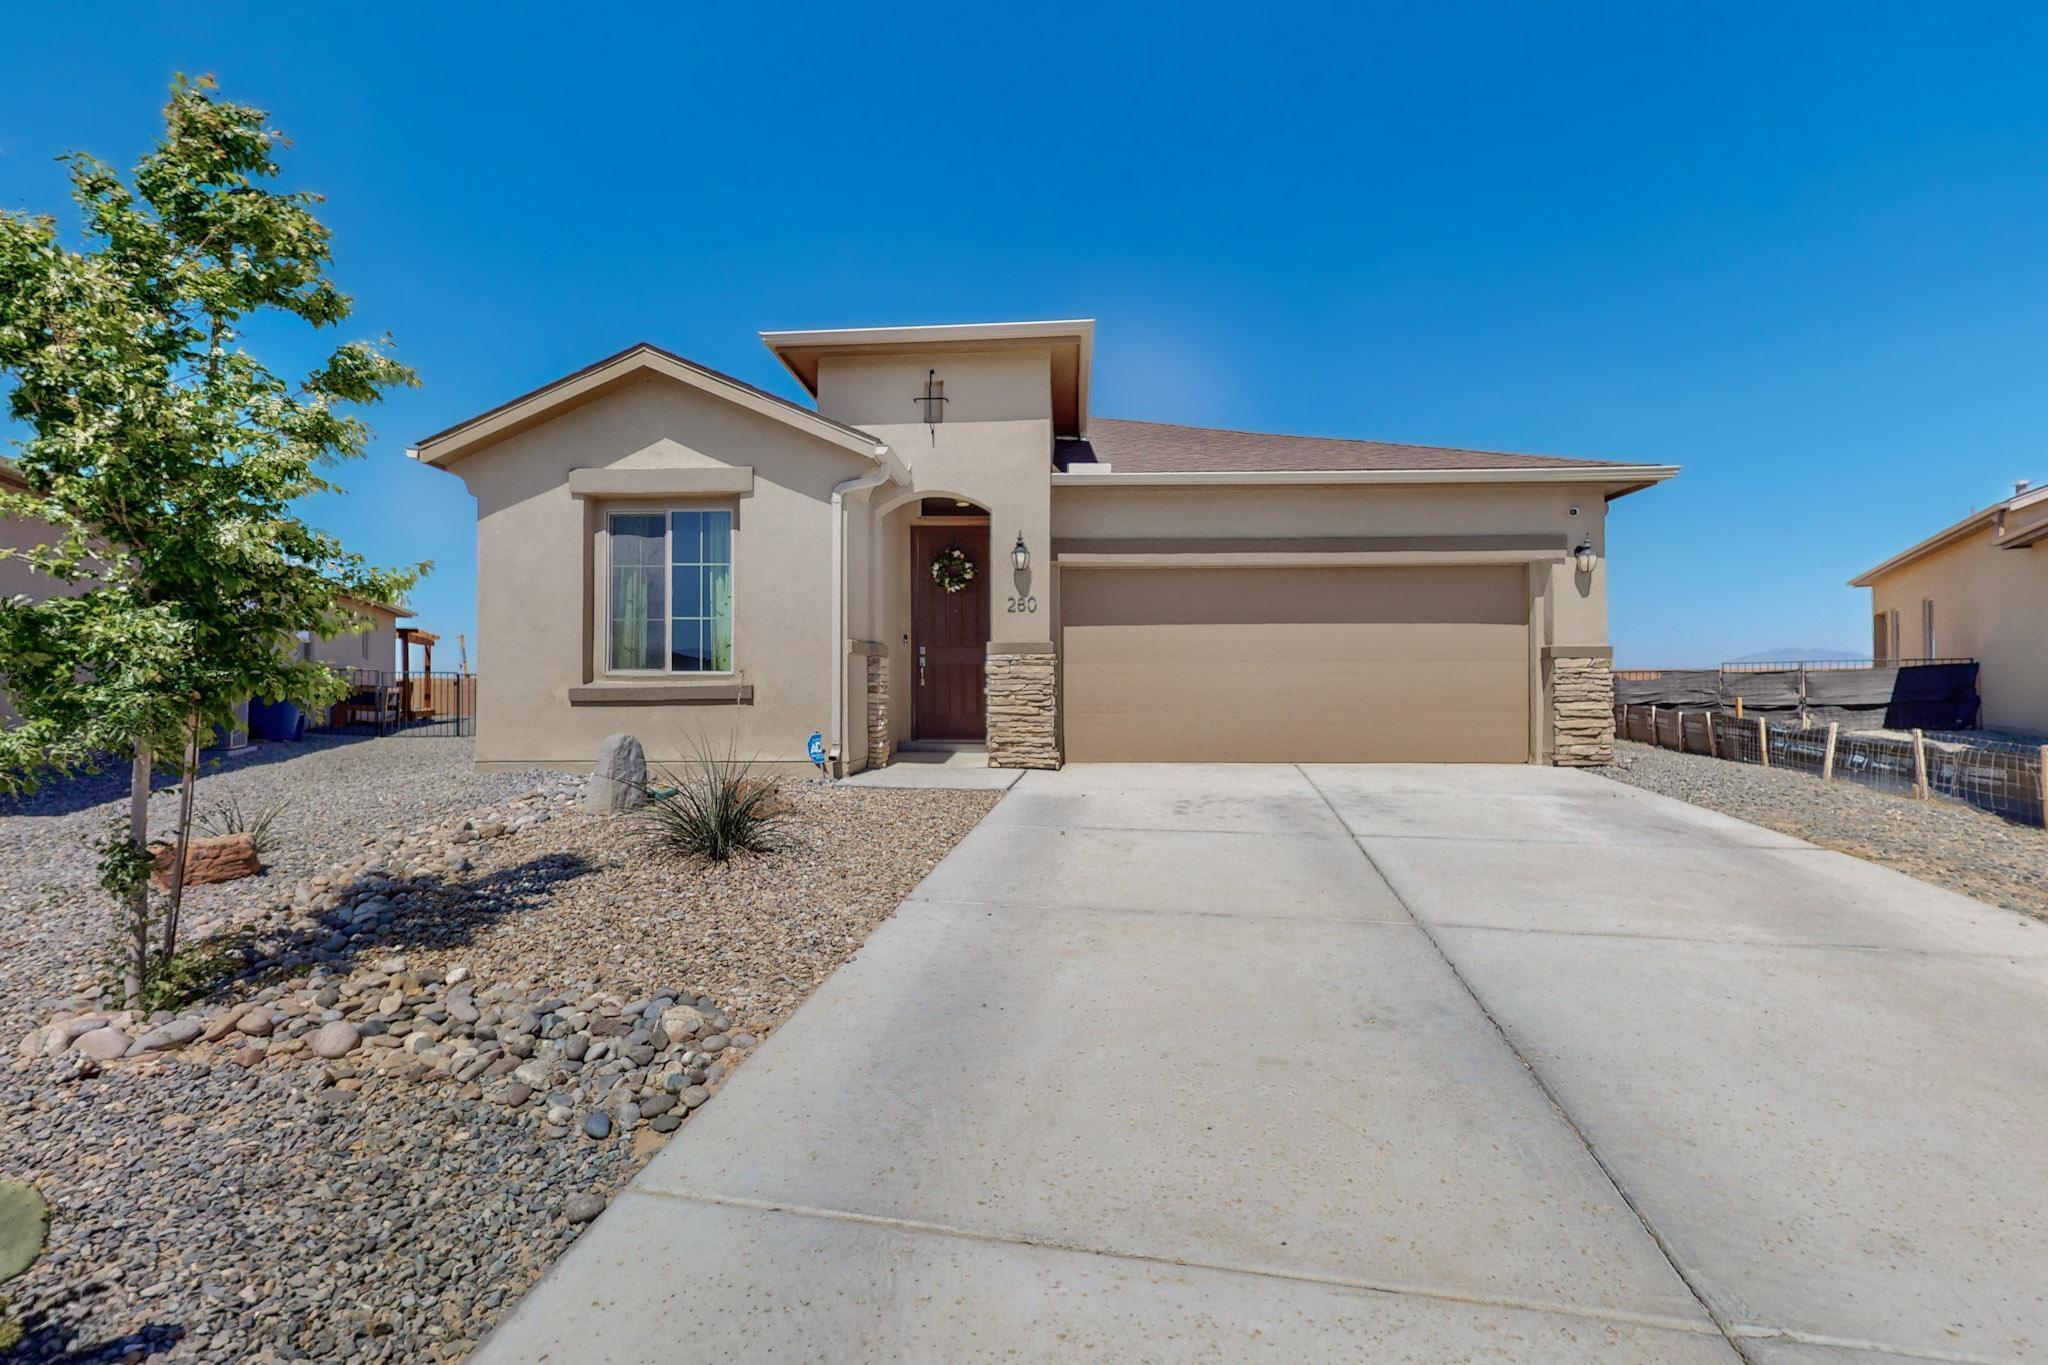 Welcome Home to this immaculate turnkey home in Los Lunas! Step into this 4-bedroom 2 bath, 2 car garage home boasts lots of light. The inviting chef's kitchen offers granite countertops, upgraded stainless steel appliances, cook top ,castle style cabinets, large walk-in pantry and large island that leads into the dining area and great room. The primary suite has beautiful custom shower, large walk-in closet, double sinks, trey ceilings and split floor plan for privacy. The home offers 8 ft doors throughout upgraded tile and high ceilings, the backyard has a covered patio, larger lot ,VIEWS all the way around. Located with easy access freeway and in one of NM fastest growing employment hubs.